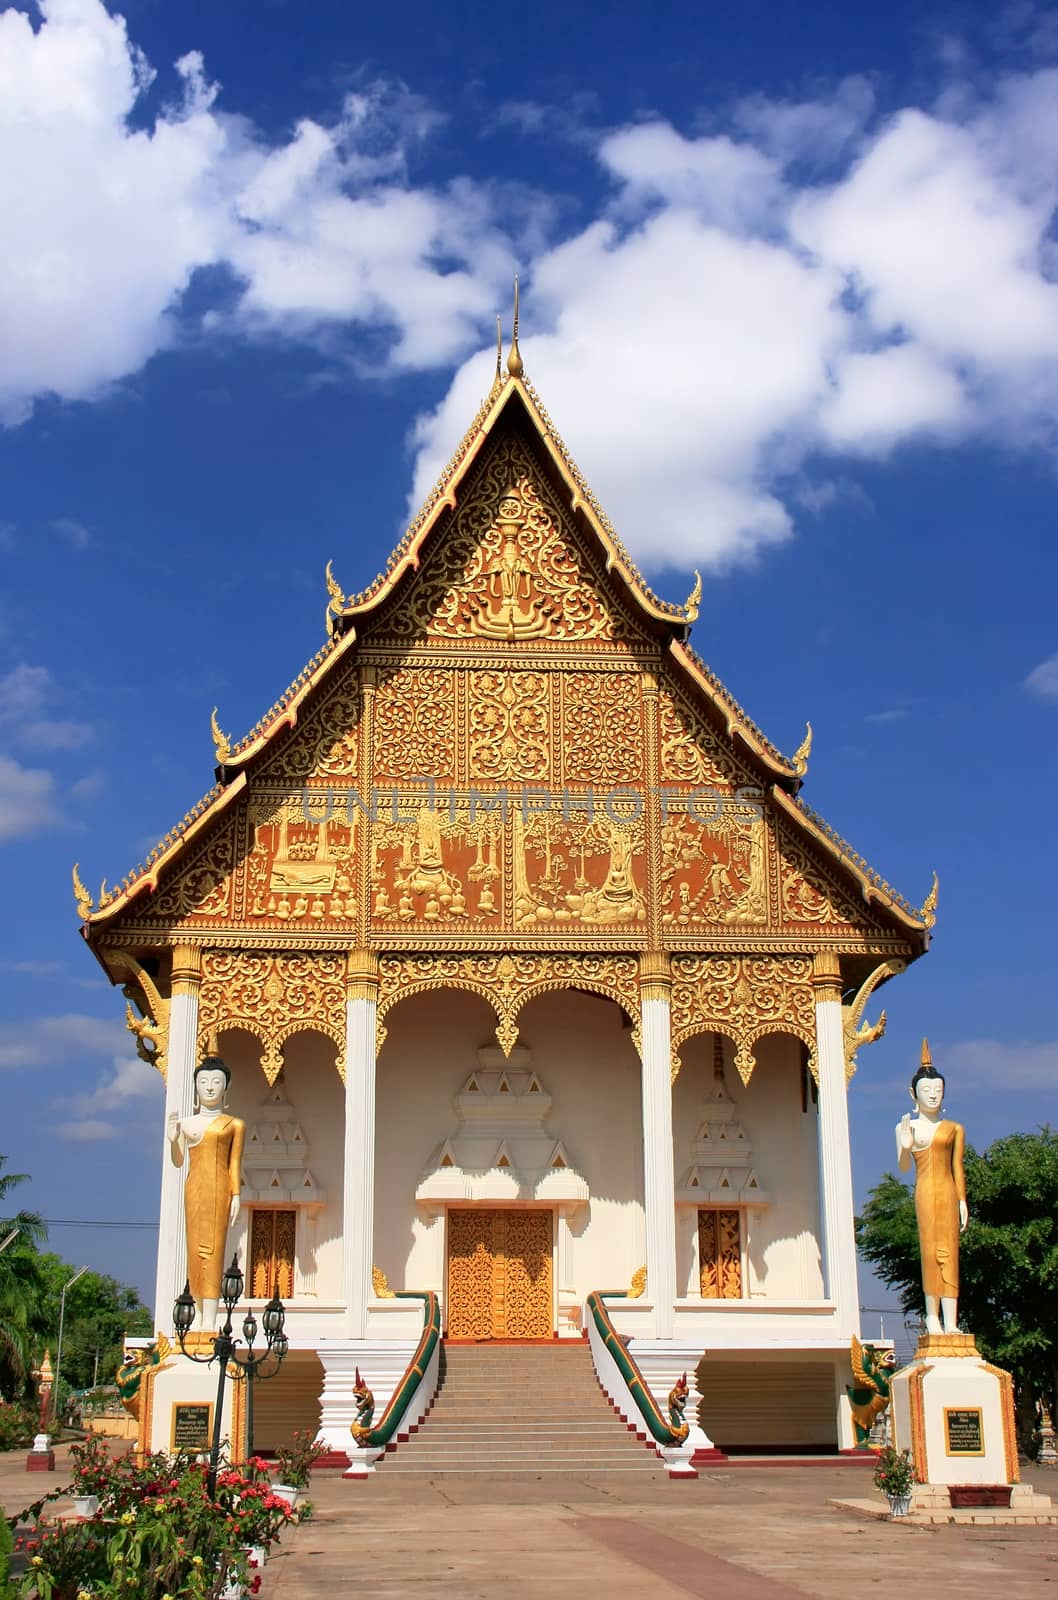 Temple at Pha That Luang complex, Vientiane, Laos by donya_nedomam